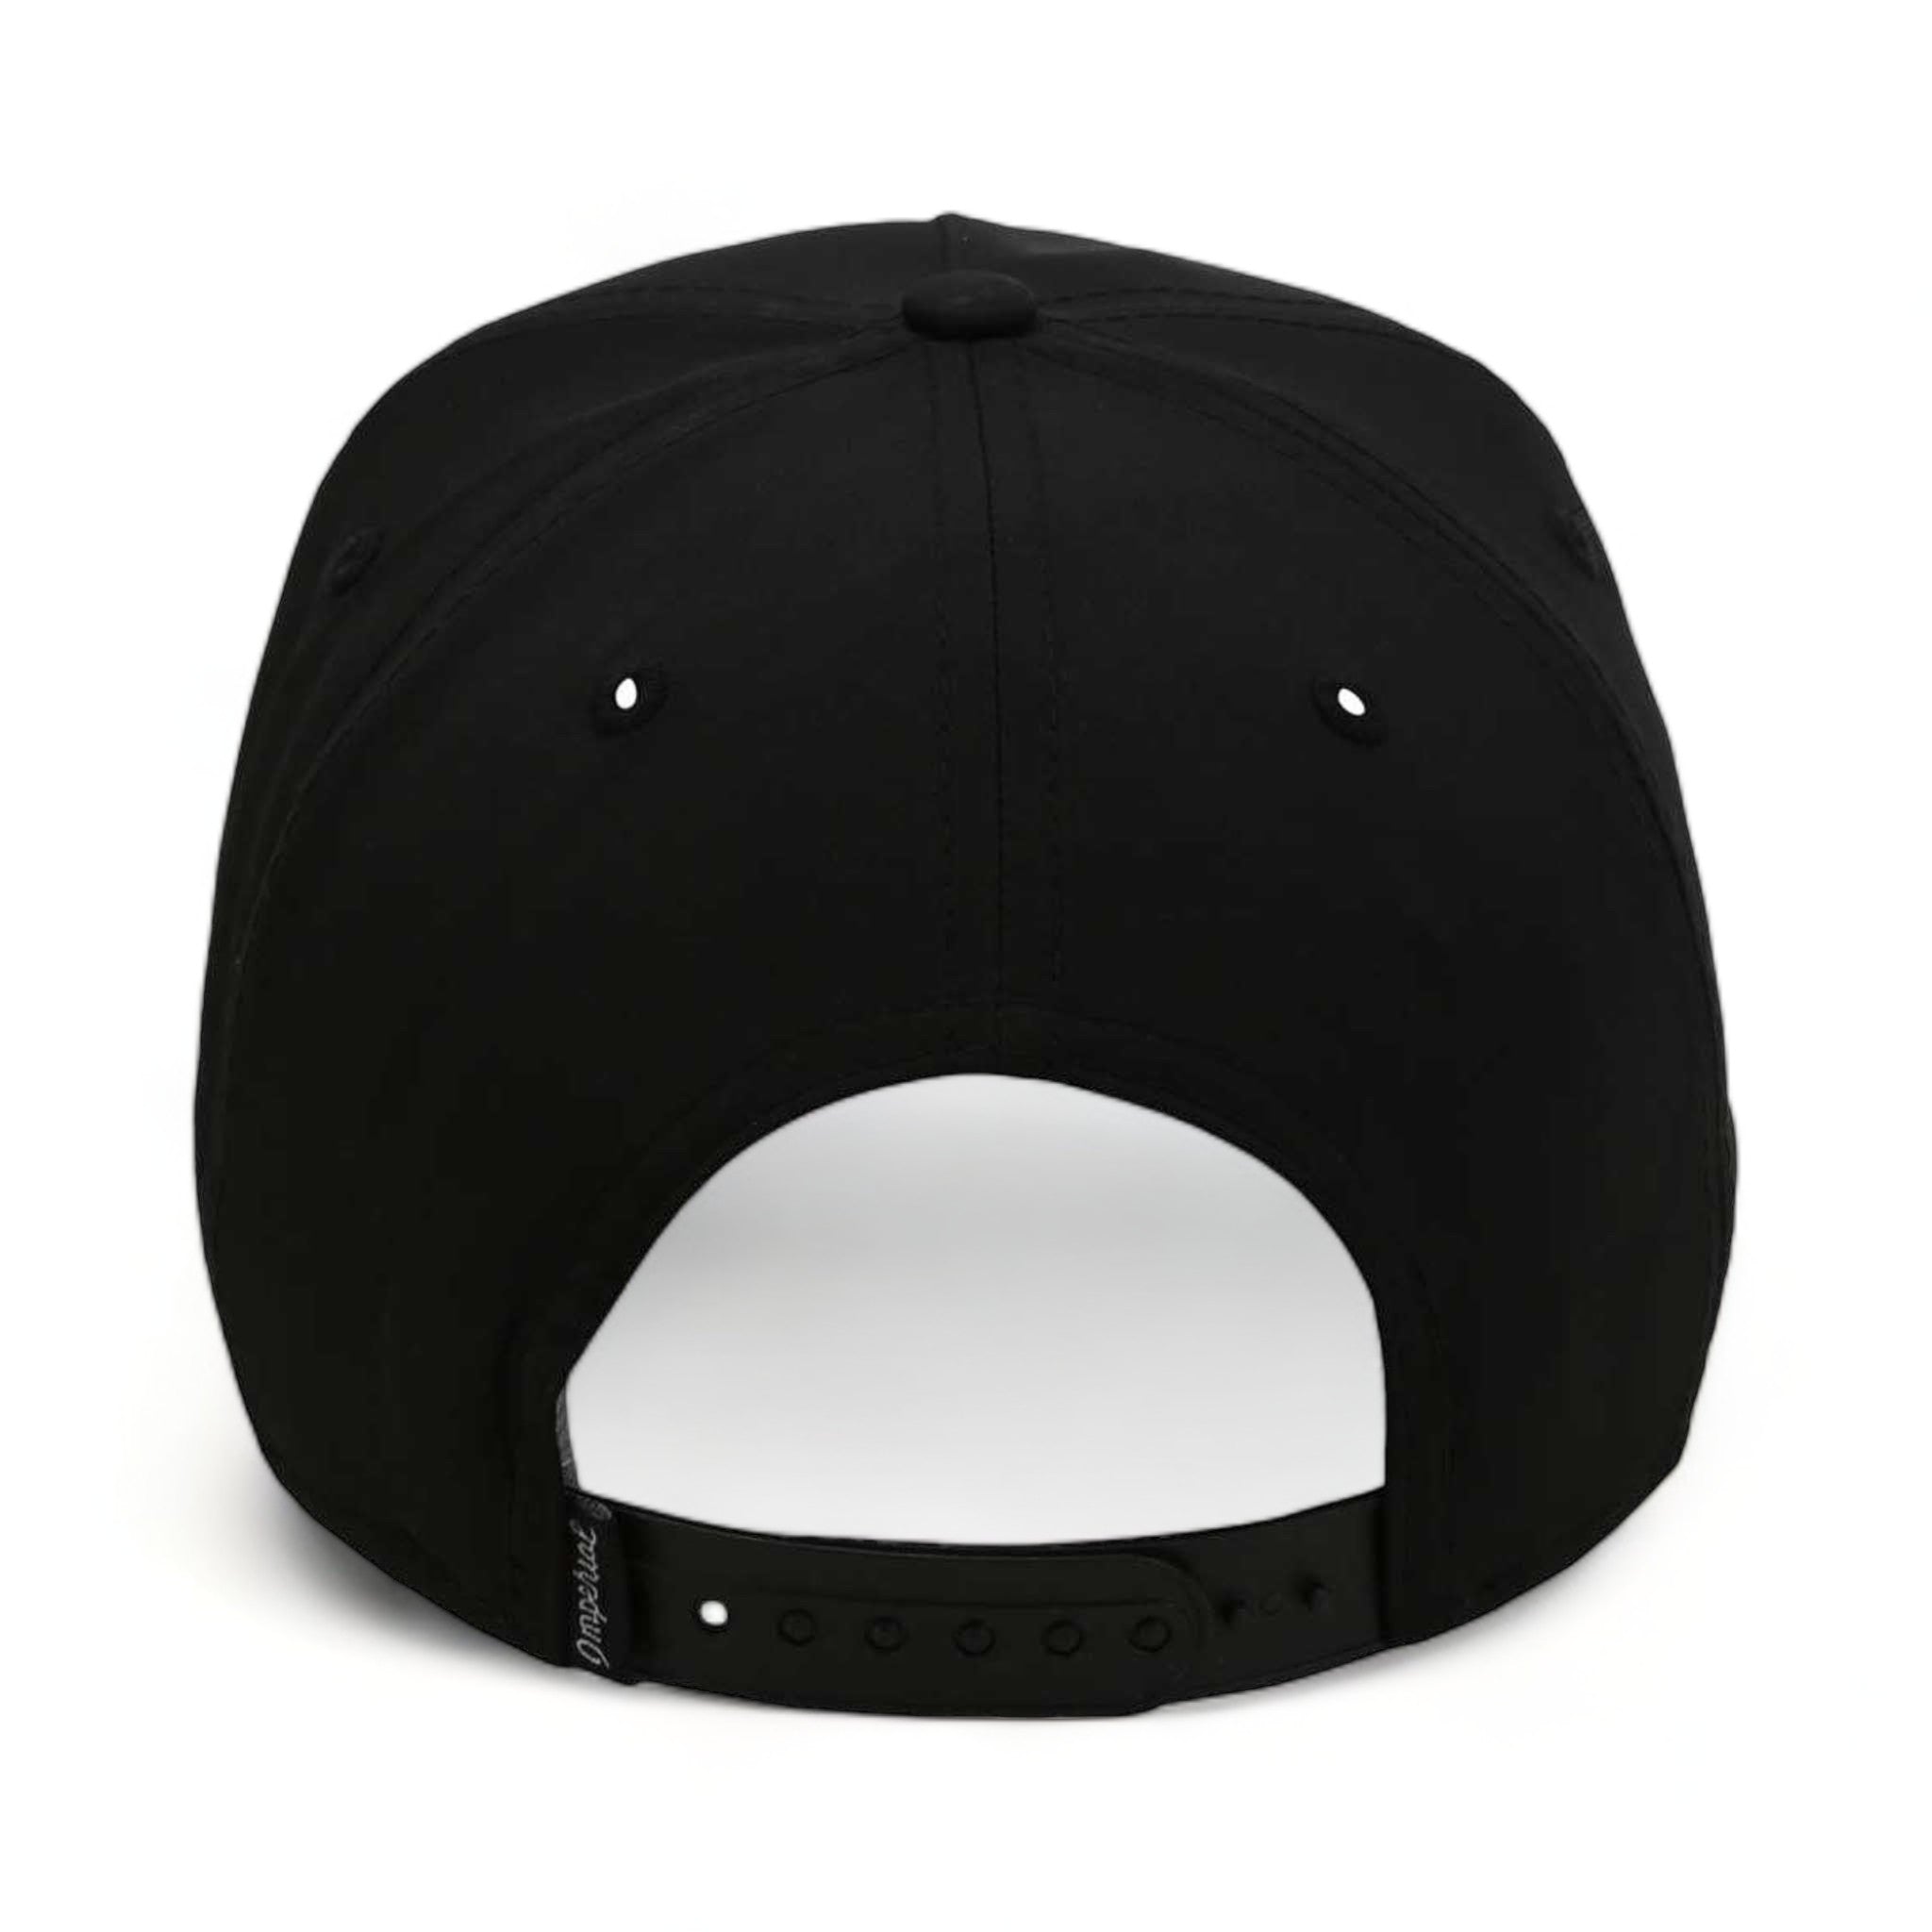 Back view of Imperial 5054 custom hat in black and black